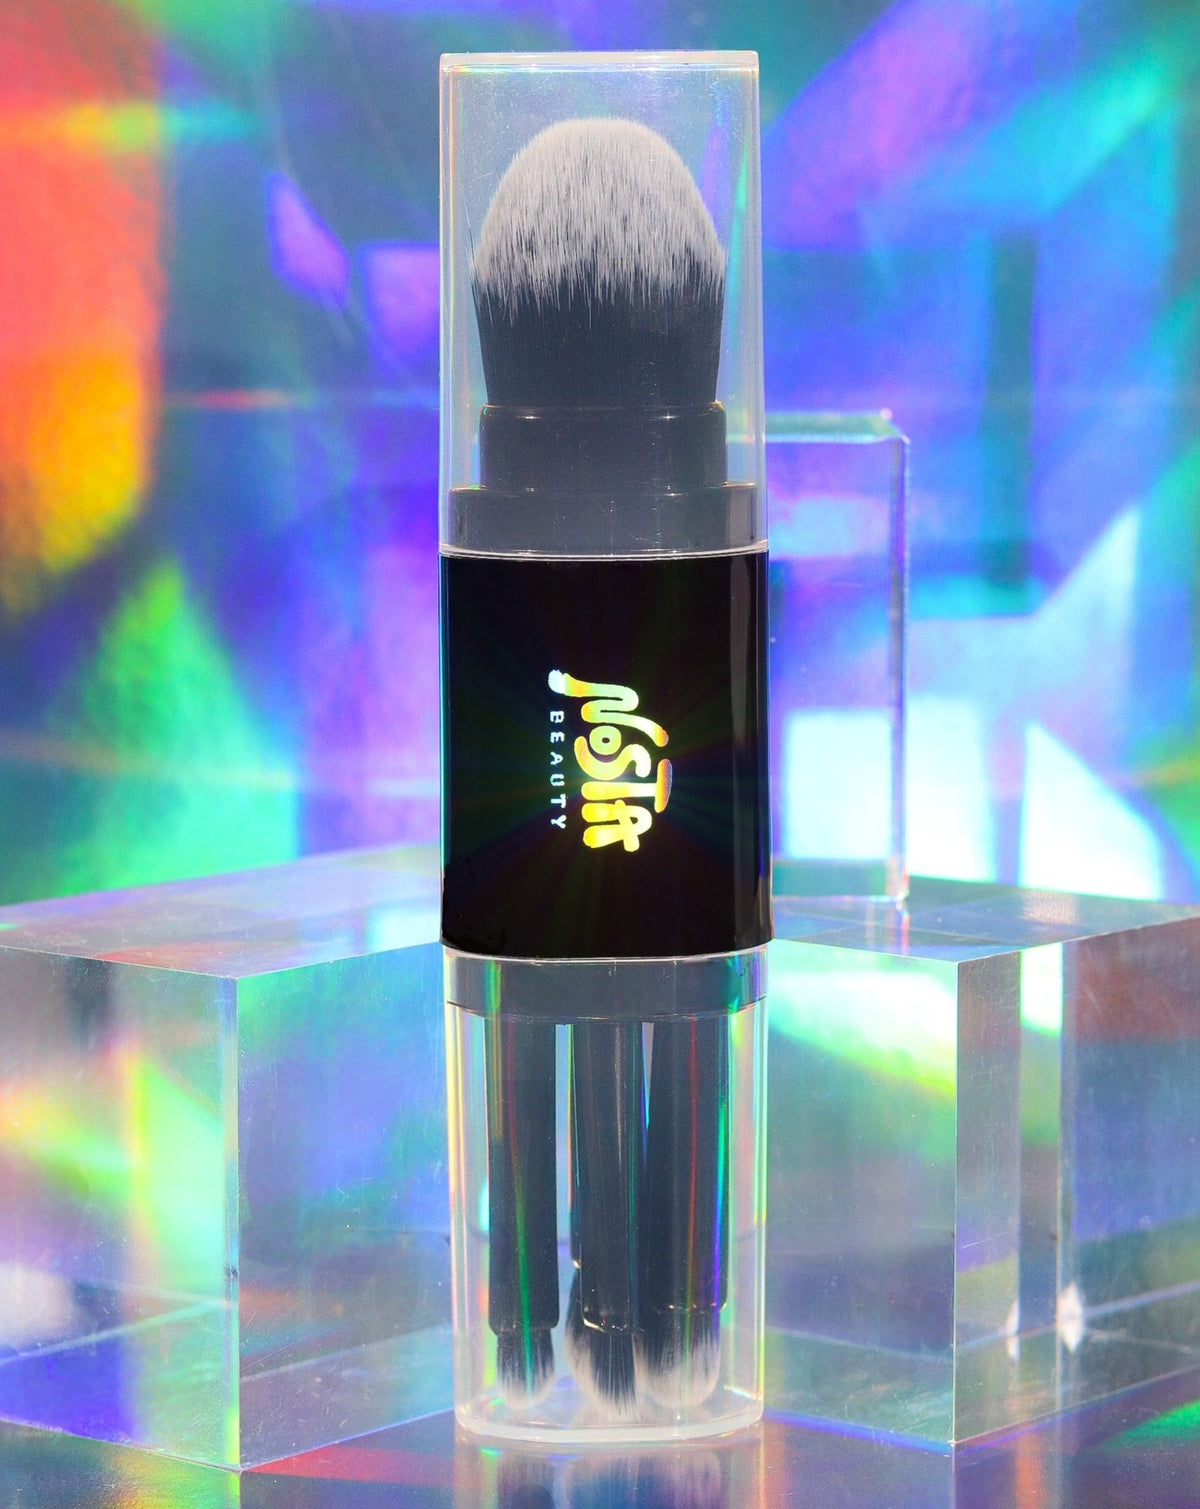 This is Nosta Beauty&#39;s all in one vegan makeup brush set with caps on, against a holographic background.